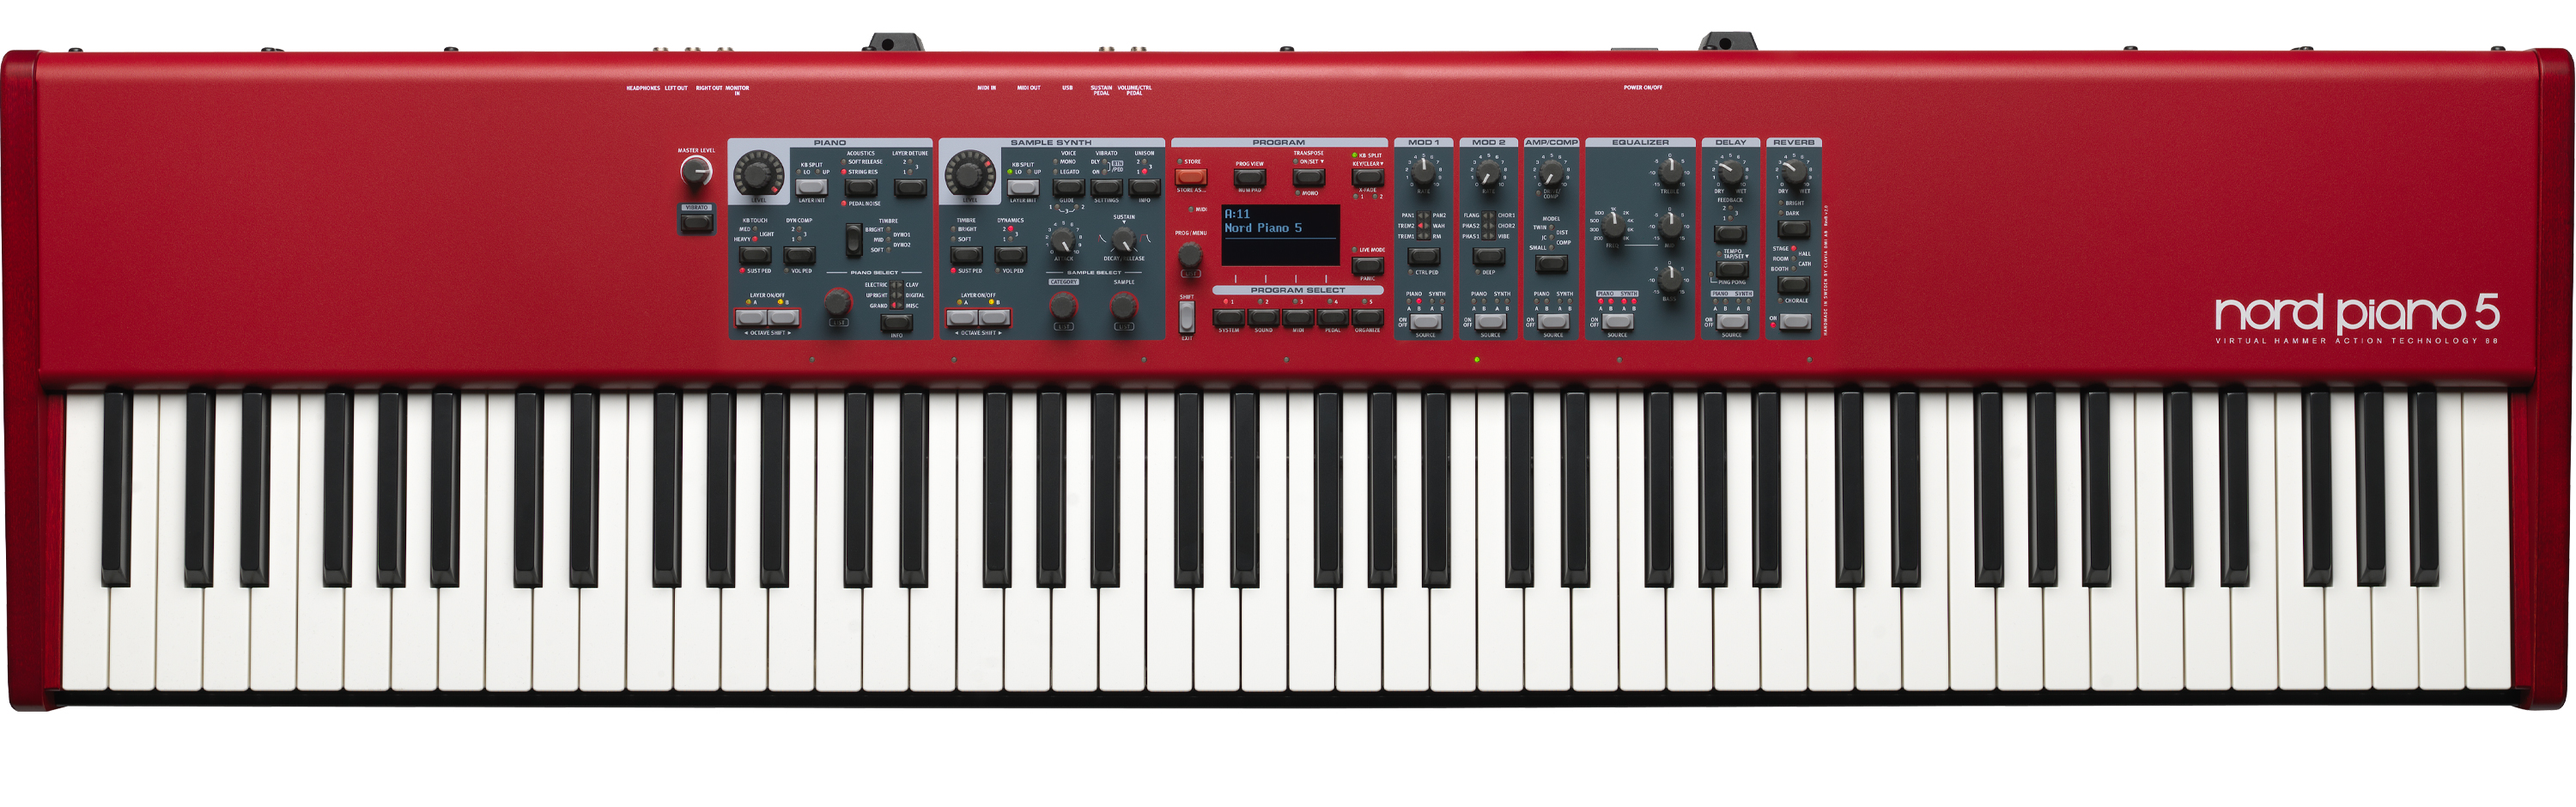 Large red piano keyboard with lots of knobs and buttons.